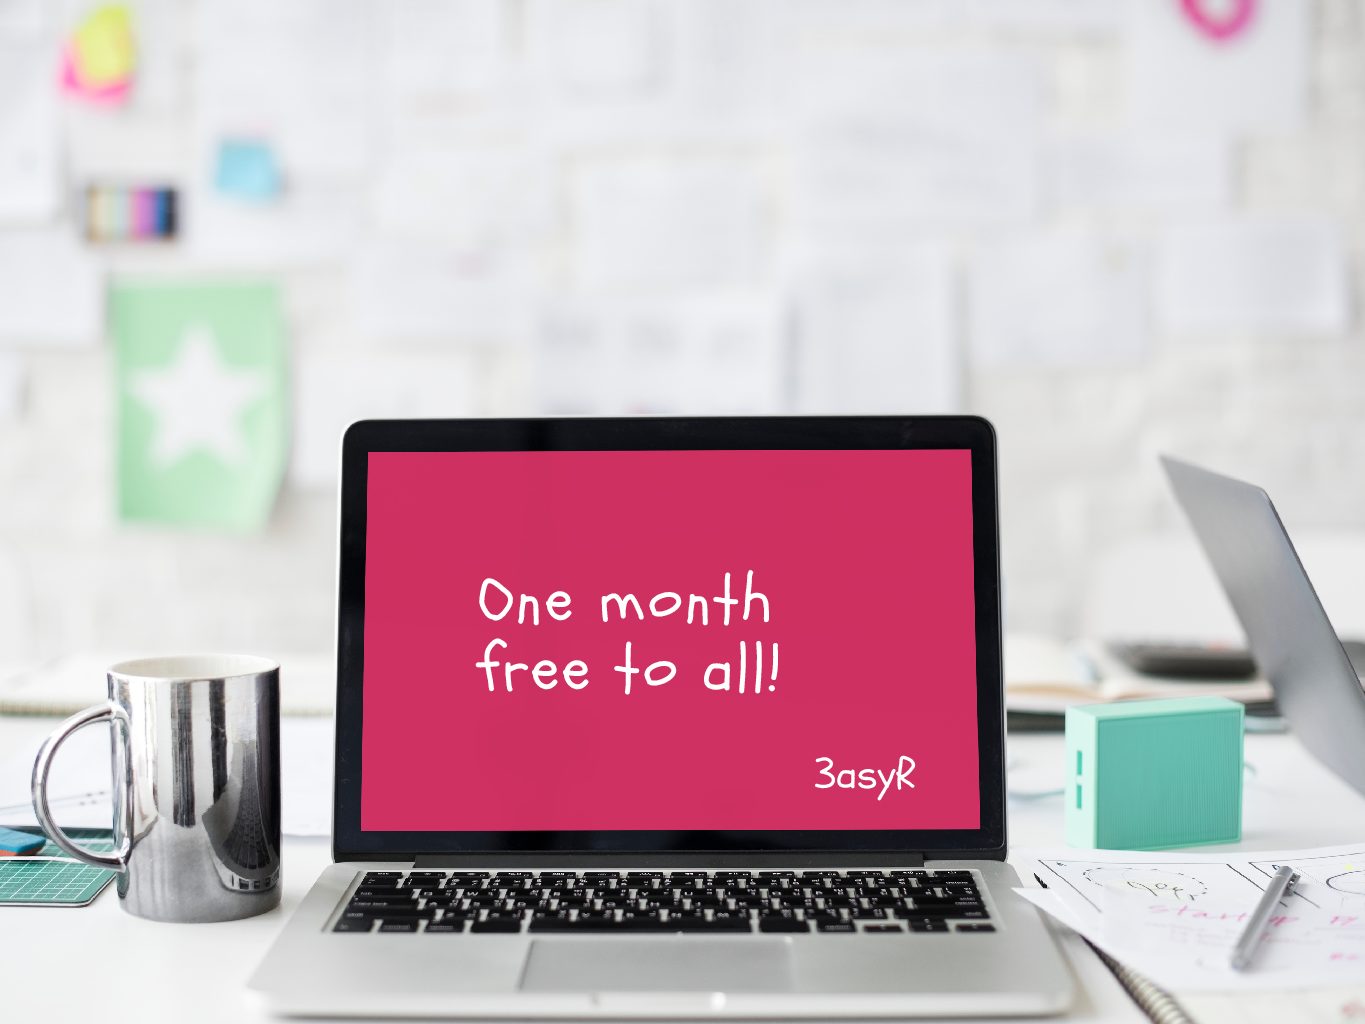 One month free to all!